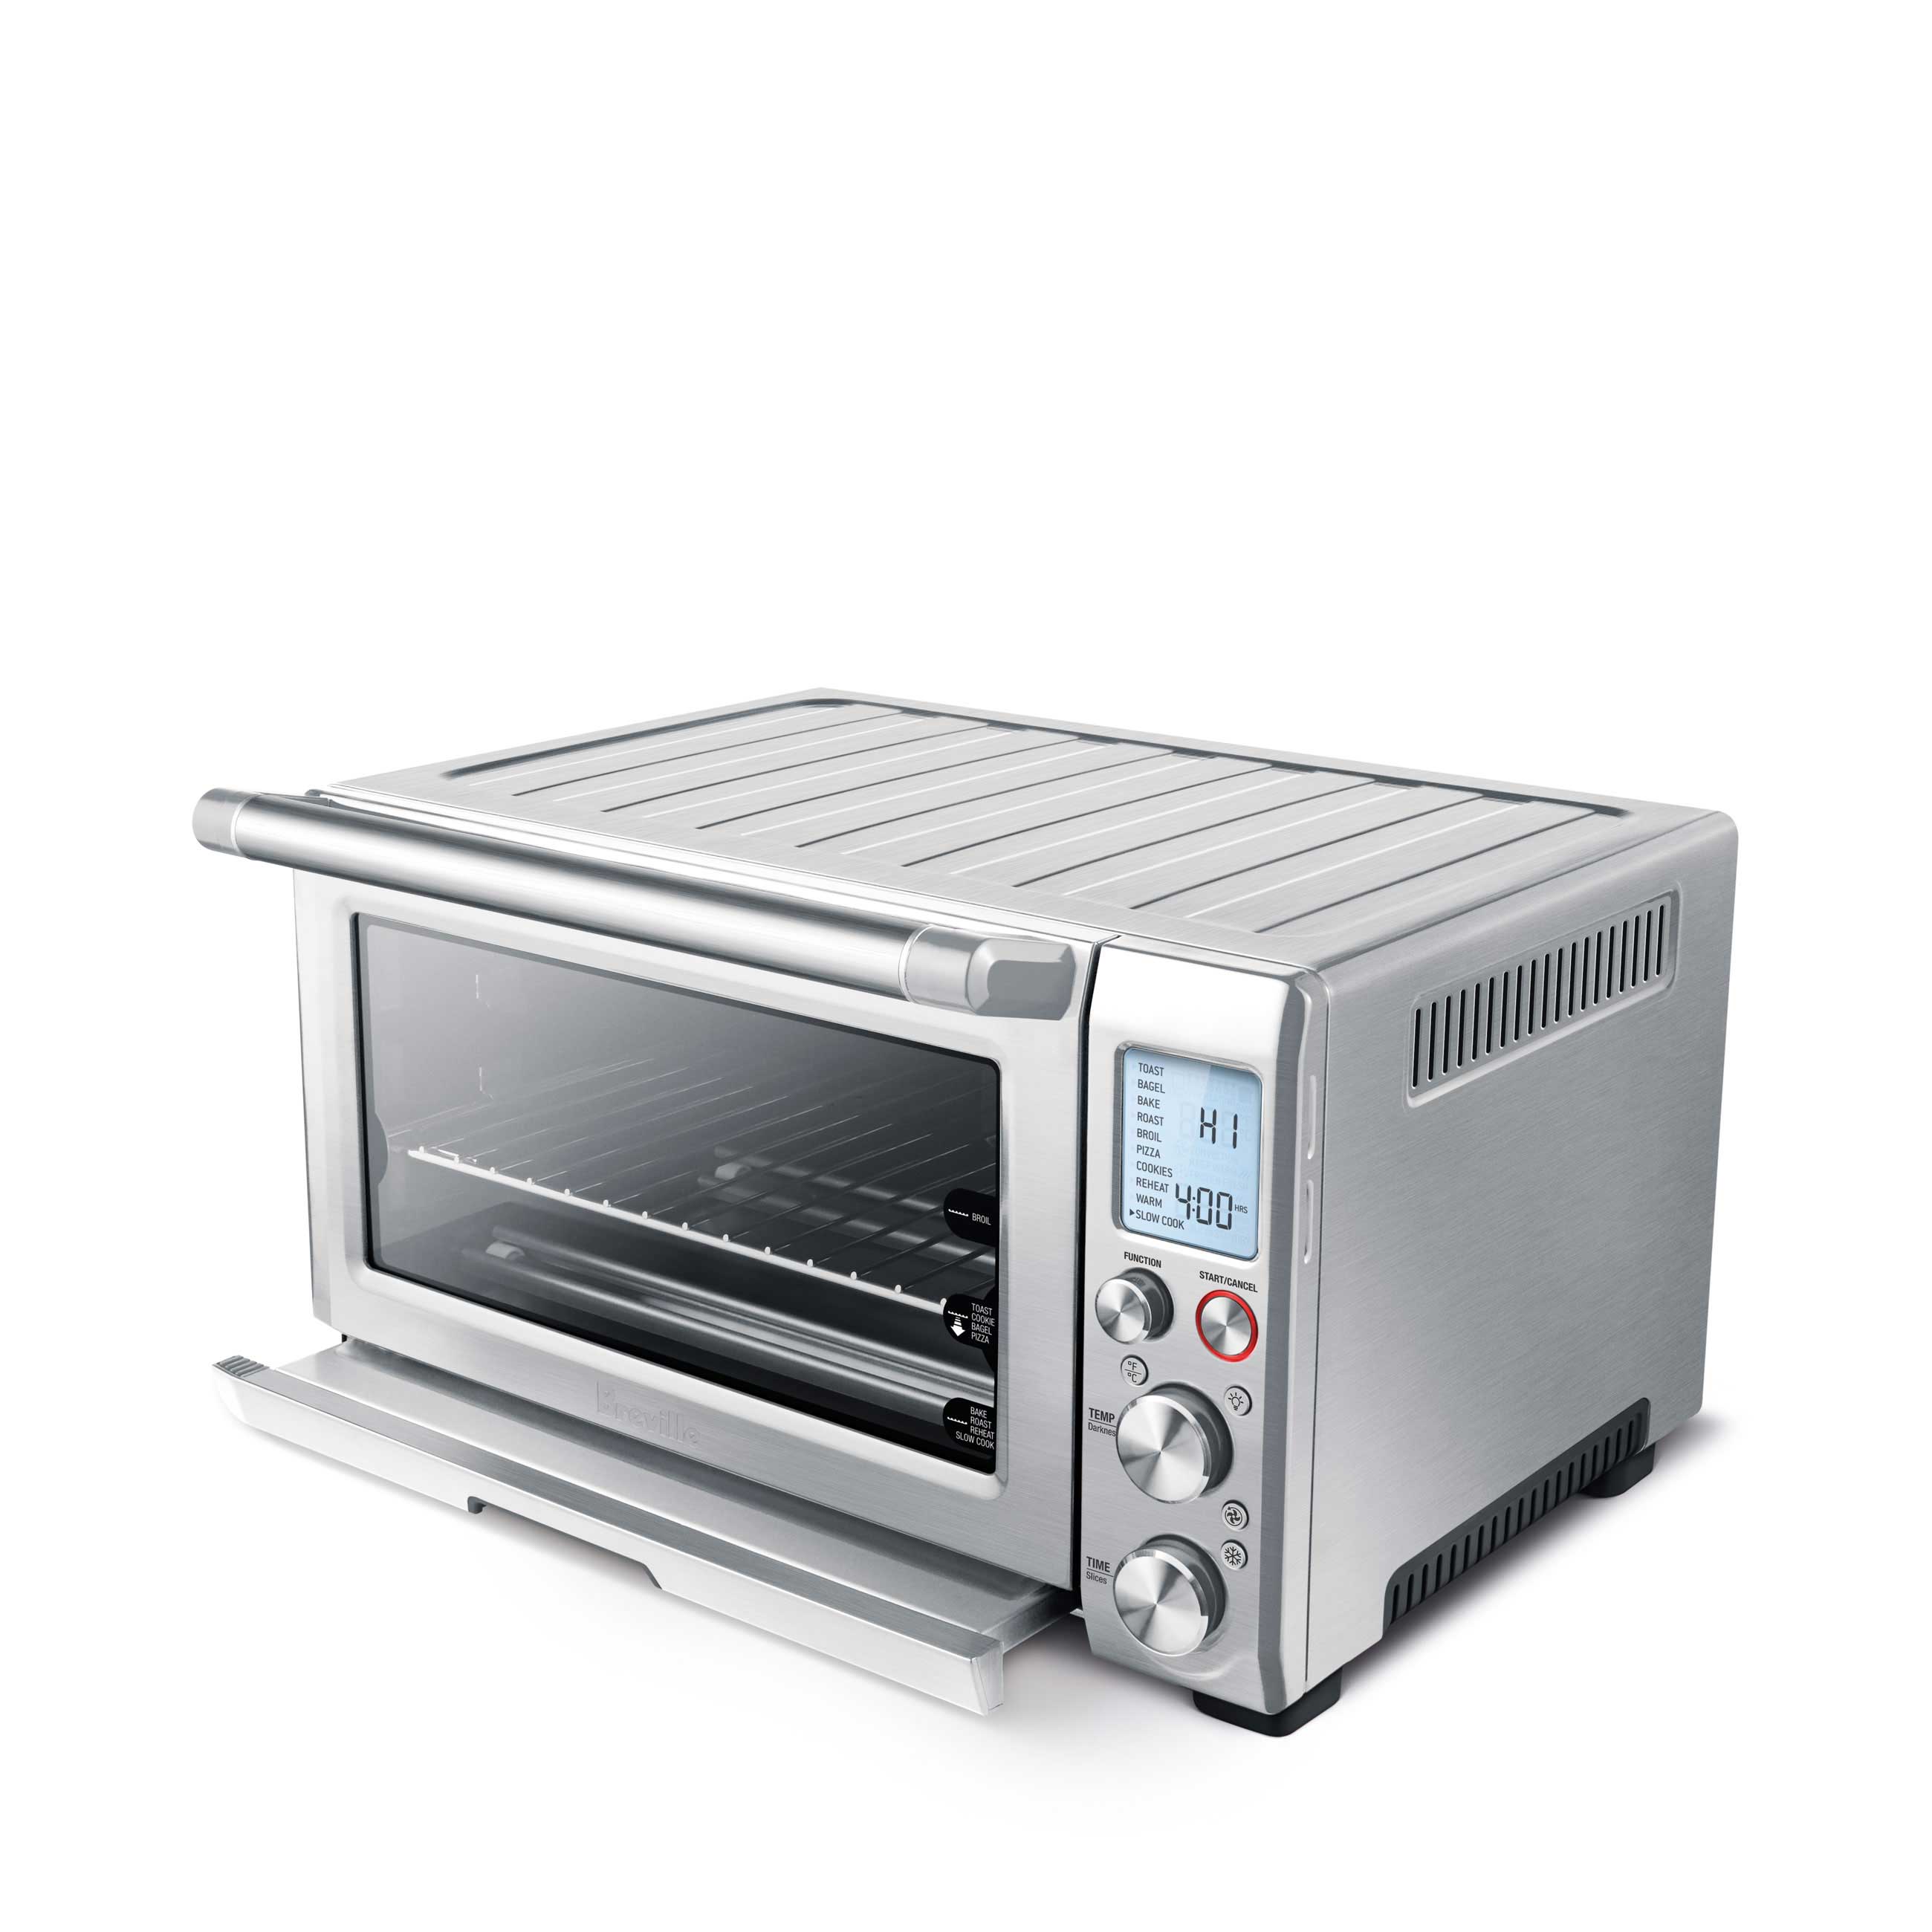 Breville Smart Oven Pro review: The key to easy meals - Reviewed